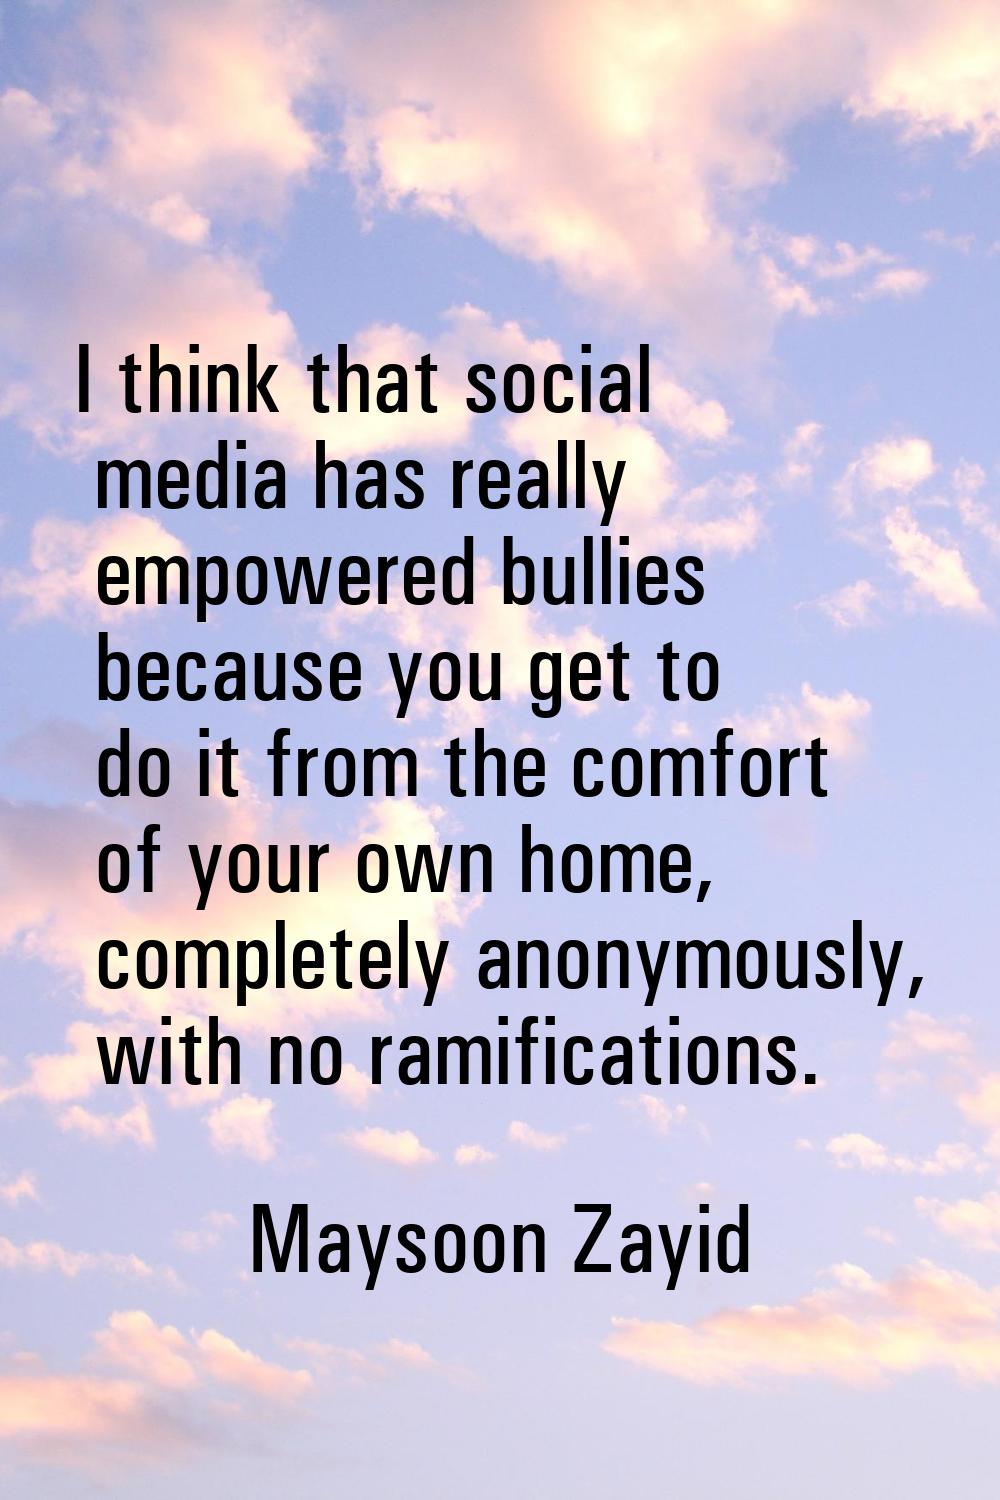 I think that social media has really empowered bullies because you get to do it from the comfort of